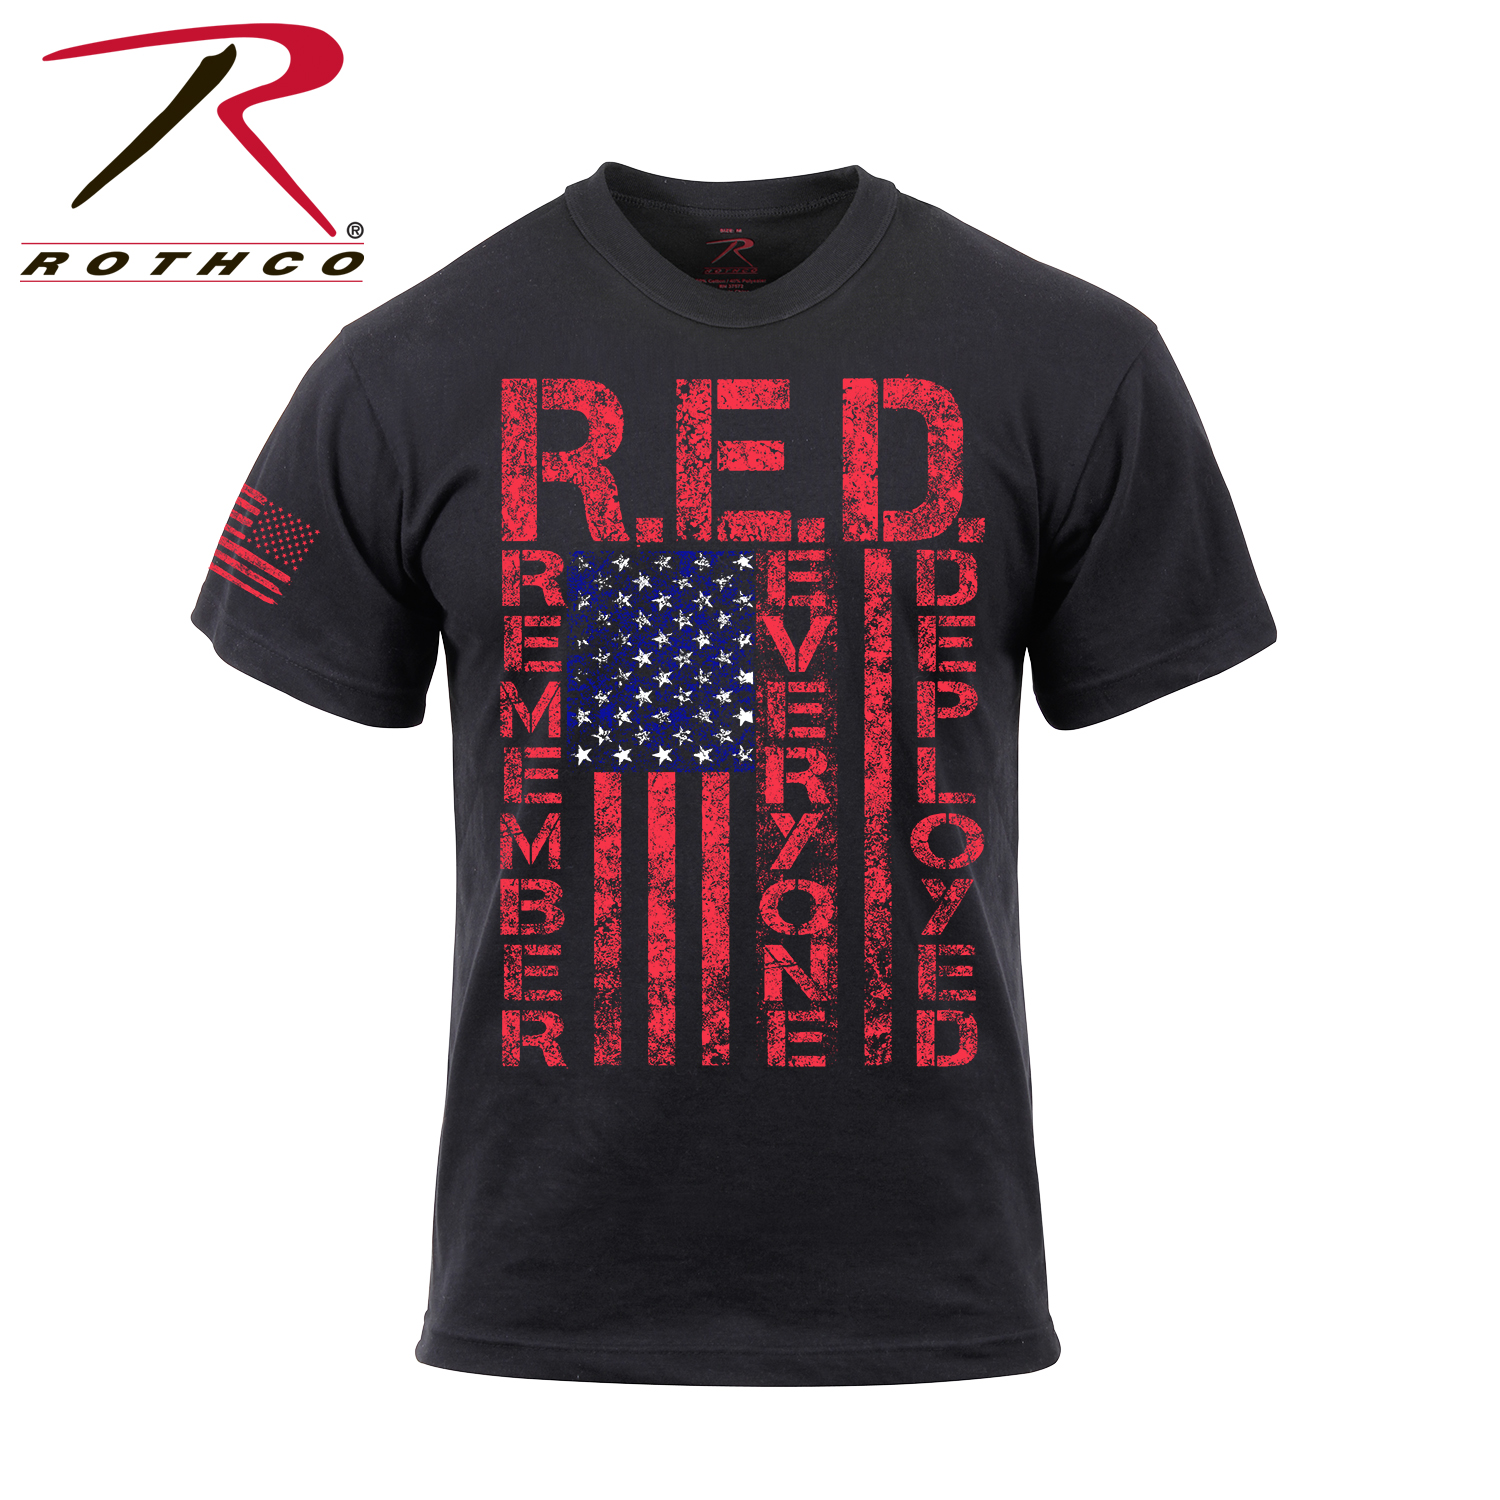 Rothco Athletic Fit R.E.D. T-Shirt